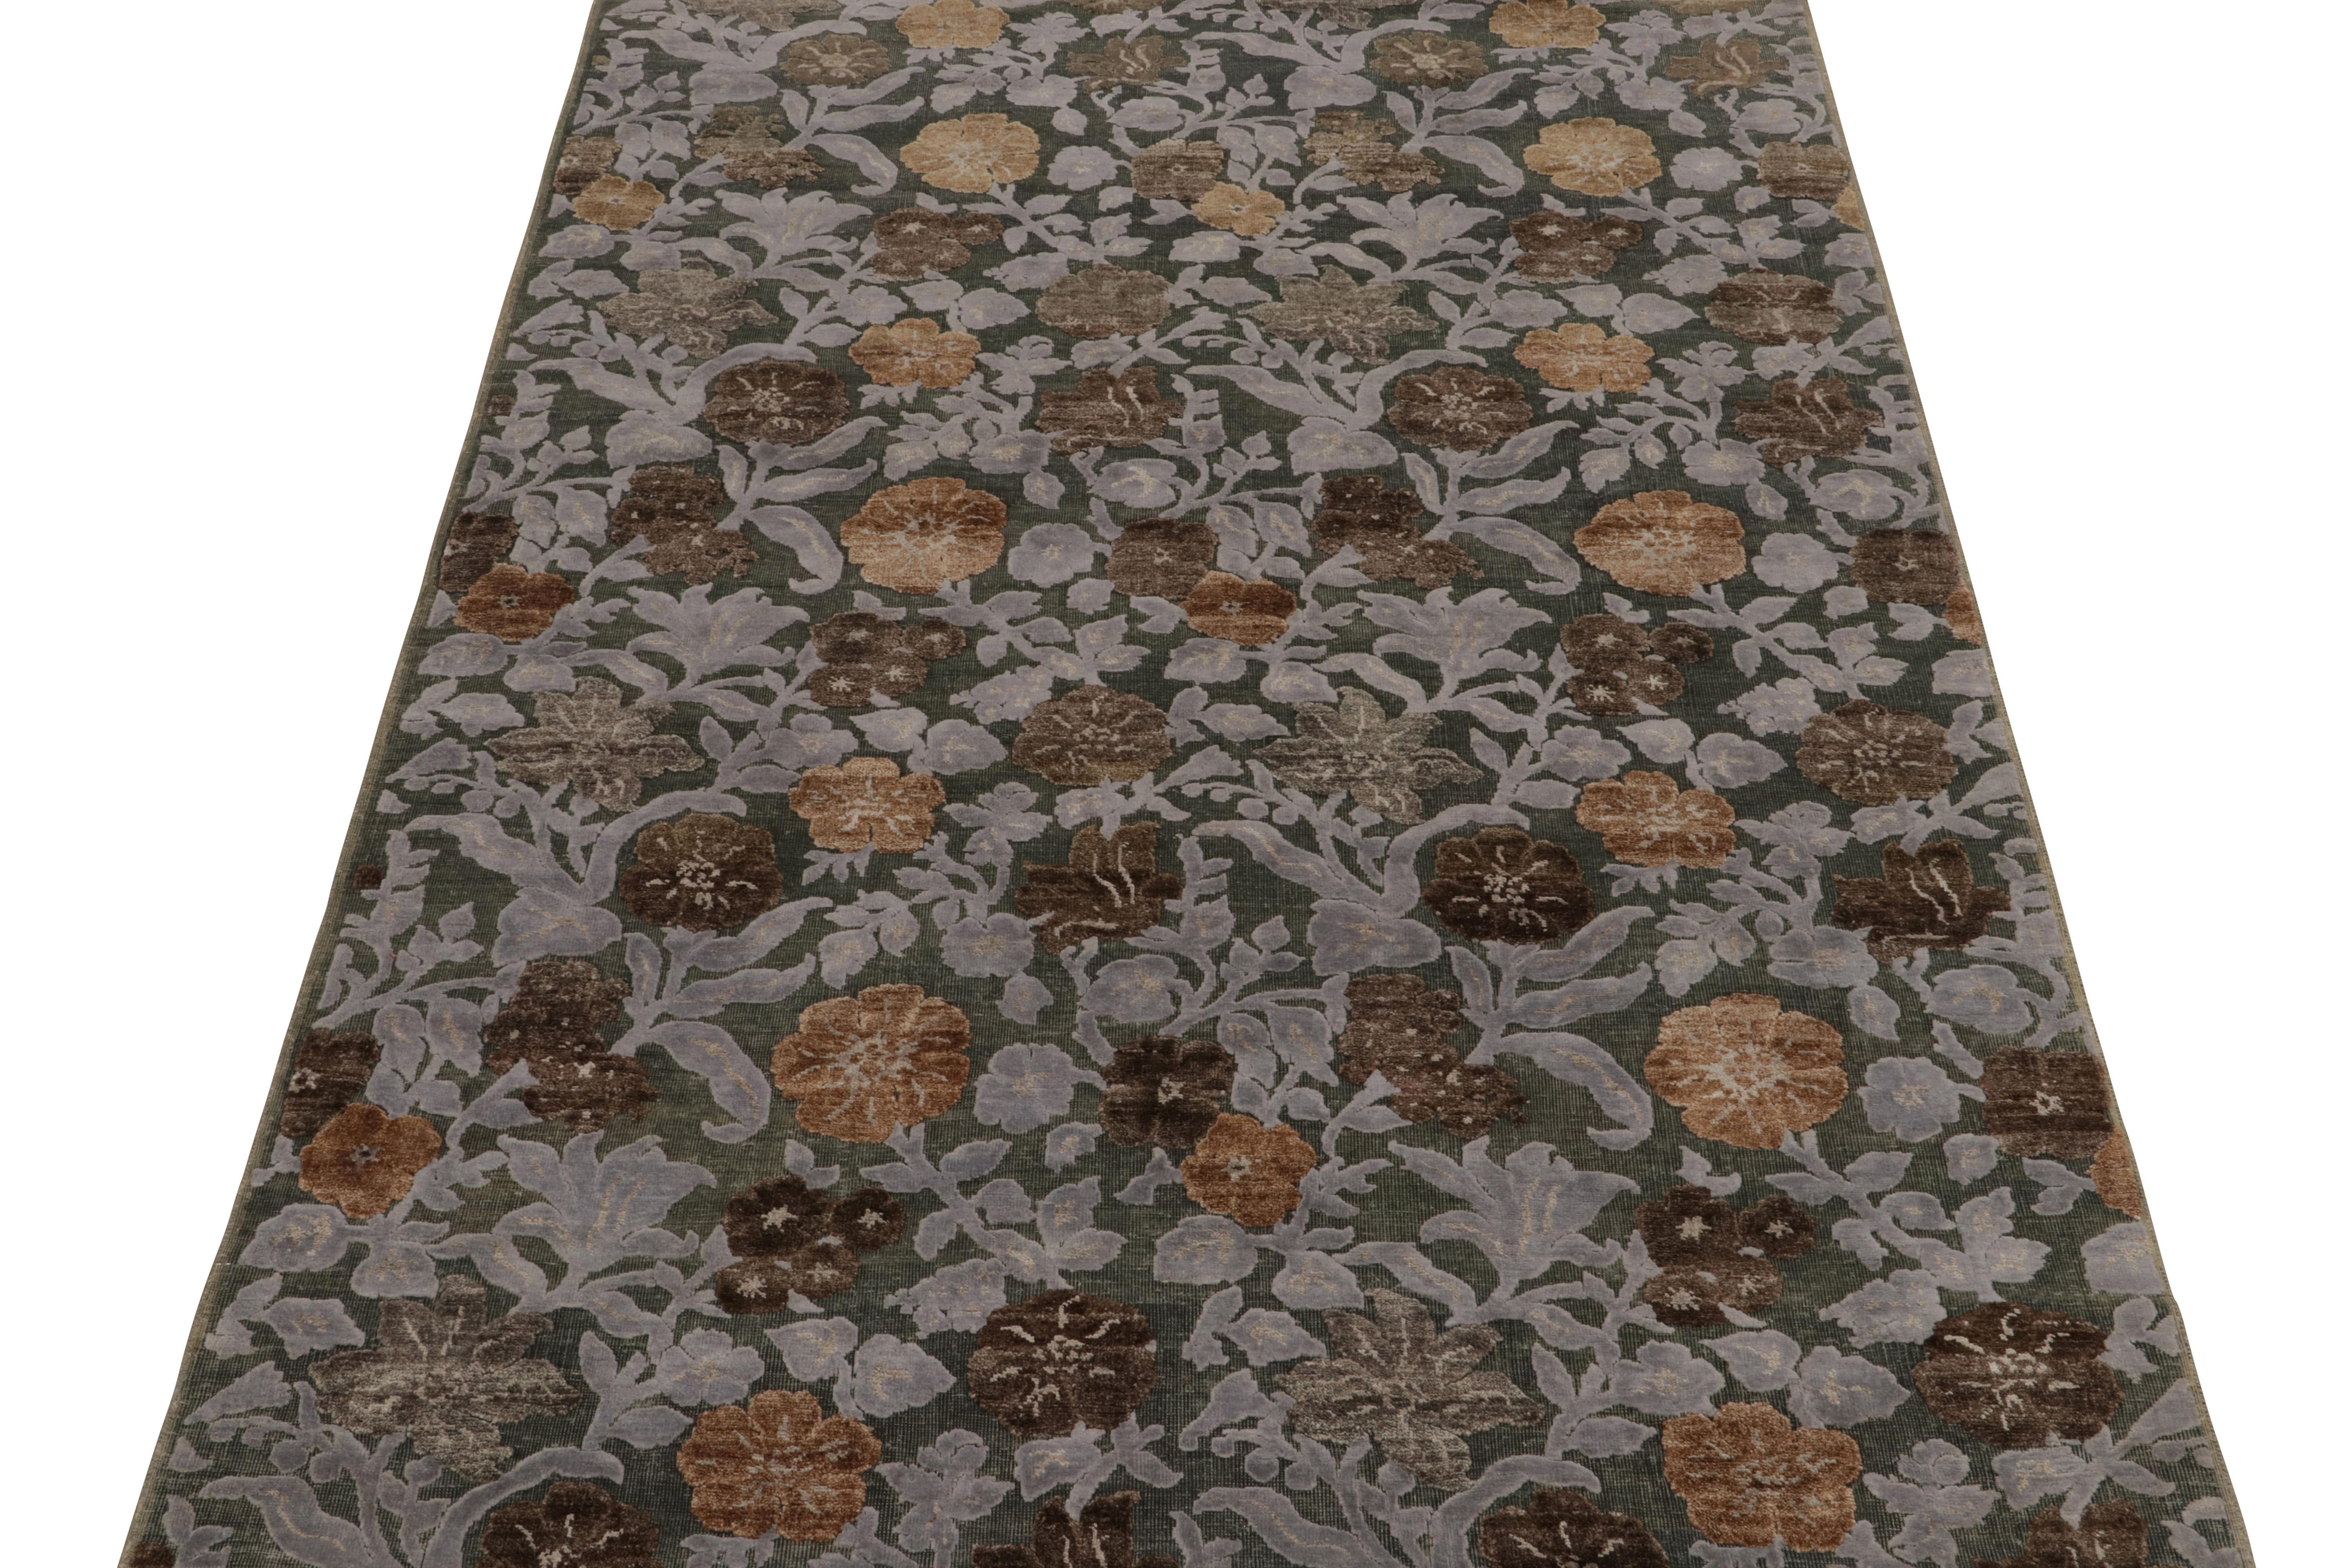 Modern Rug & Kilim’s Contemporary rug in Beige-Brown and Gray-Blue Floral Patterns For Sale